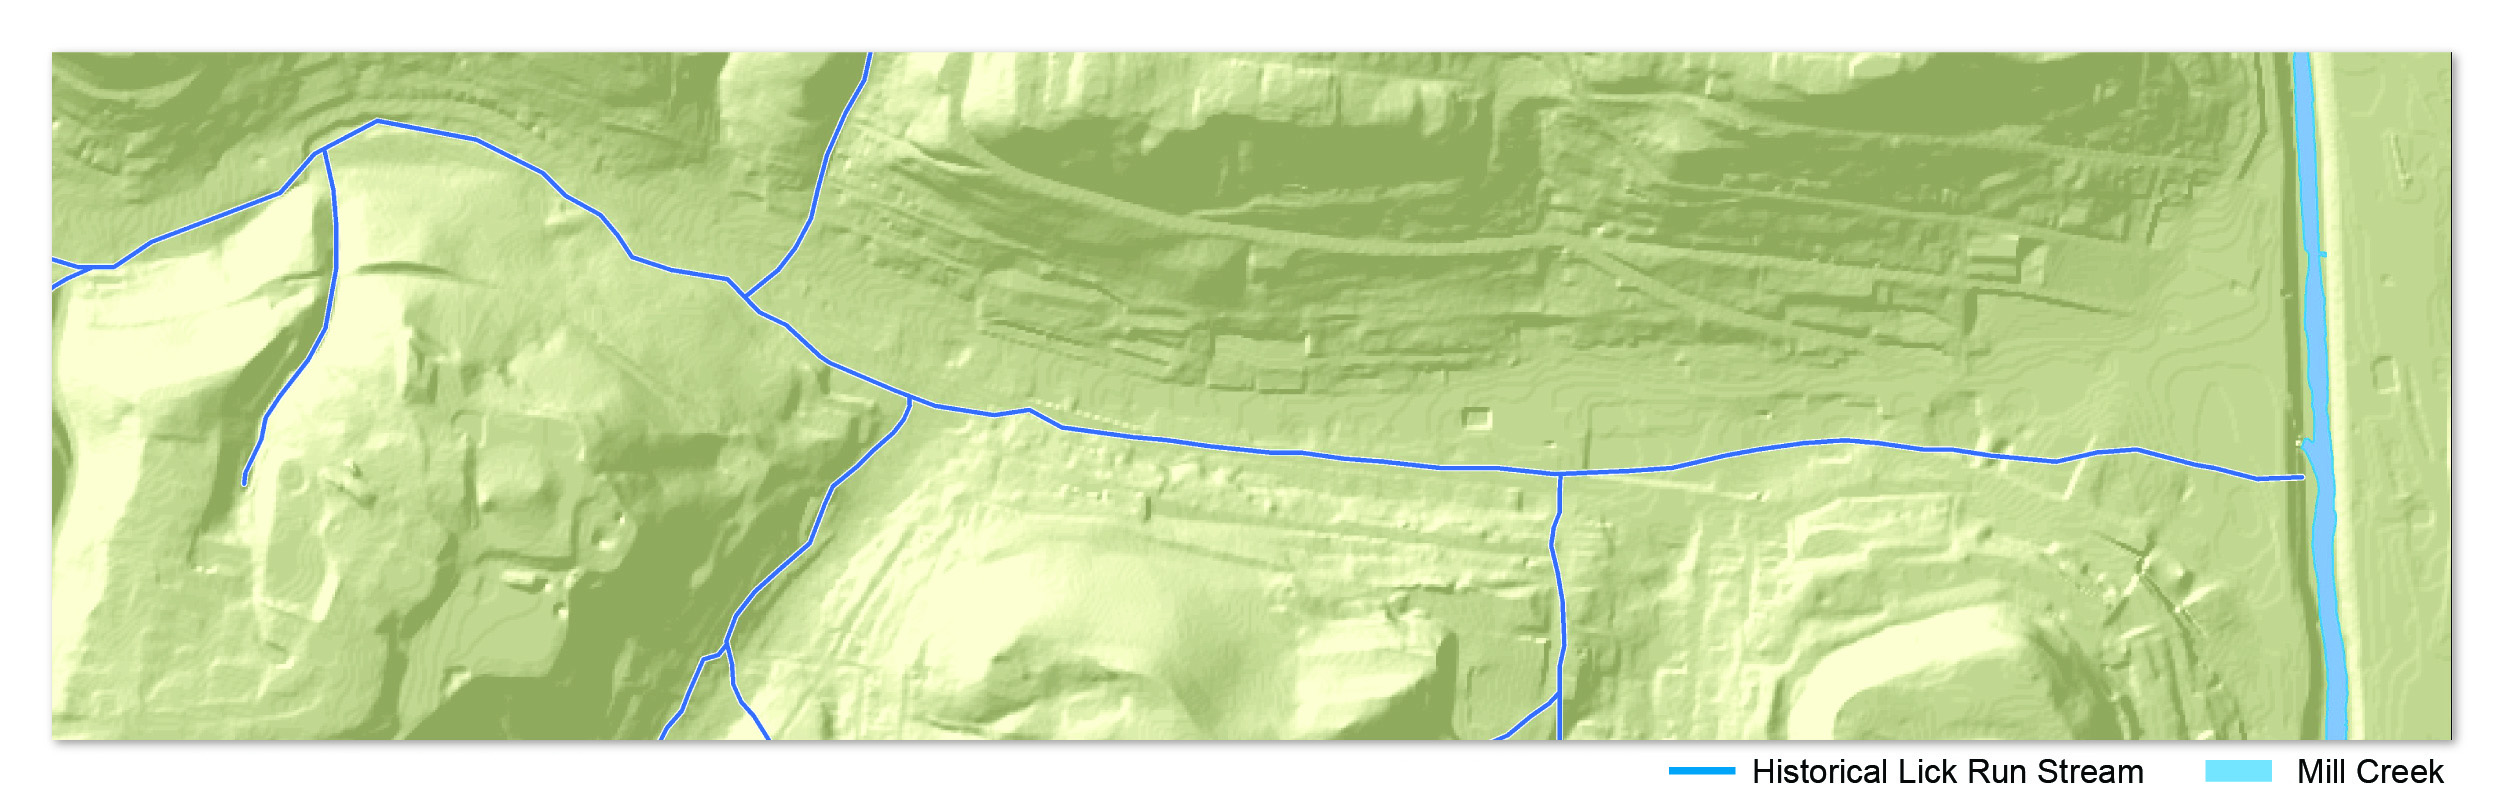 Graphic showing historic Lick Run stream flowing to the Mill Creek